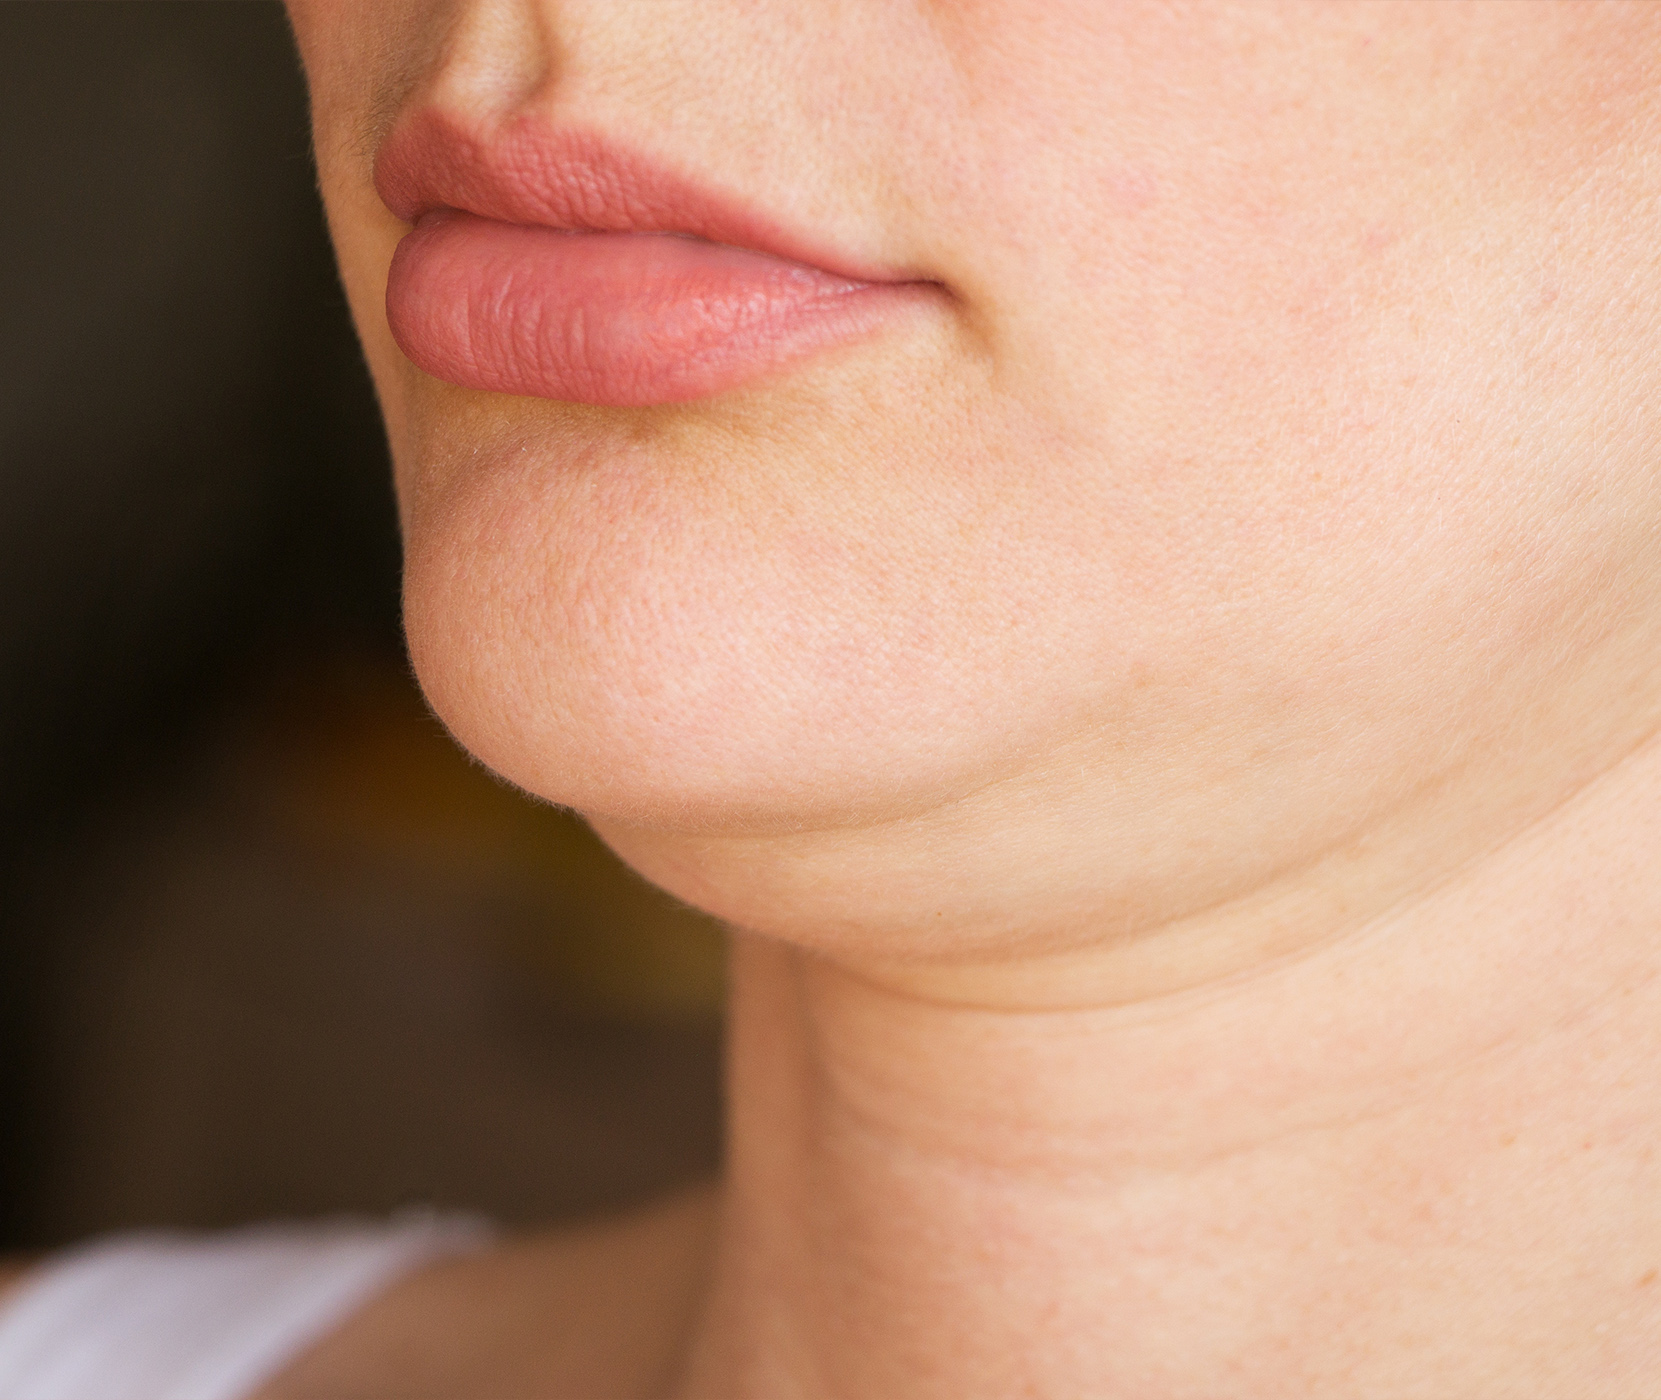 Woman's double chin